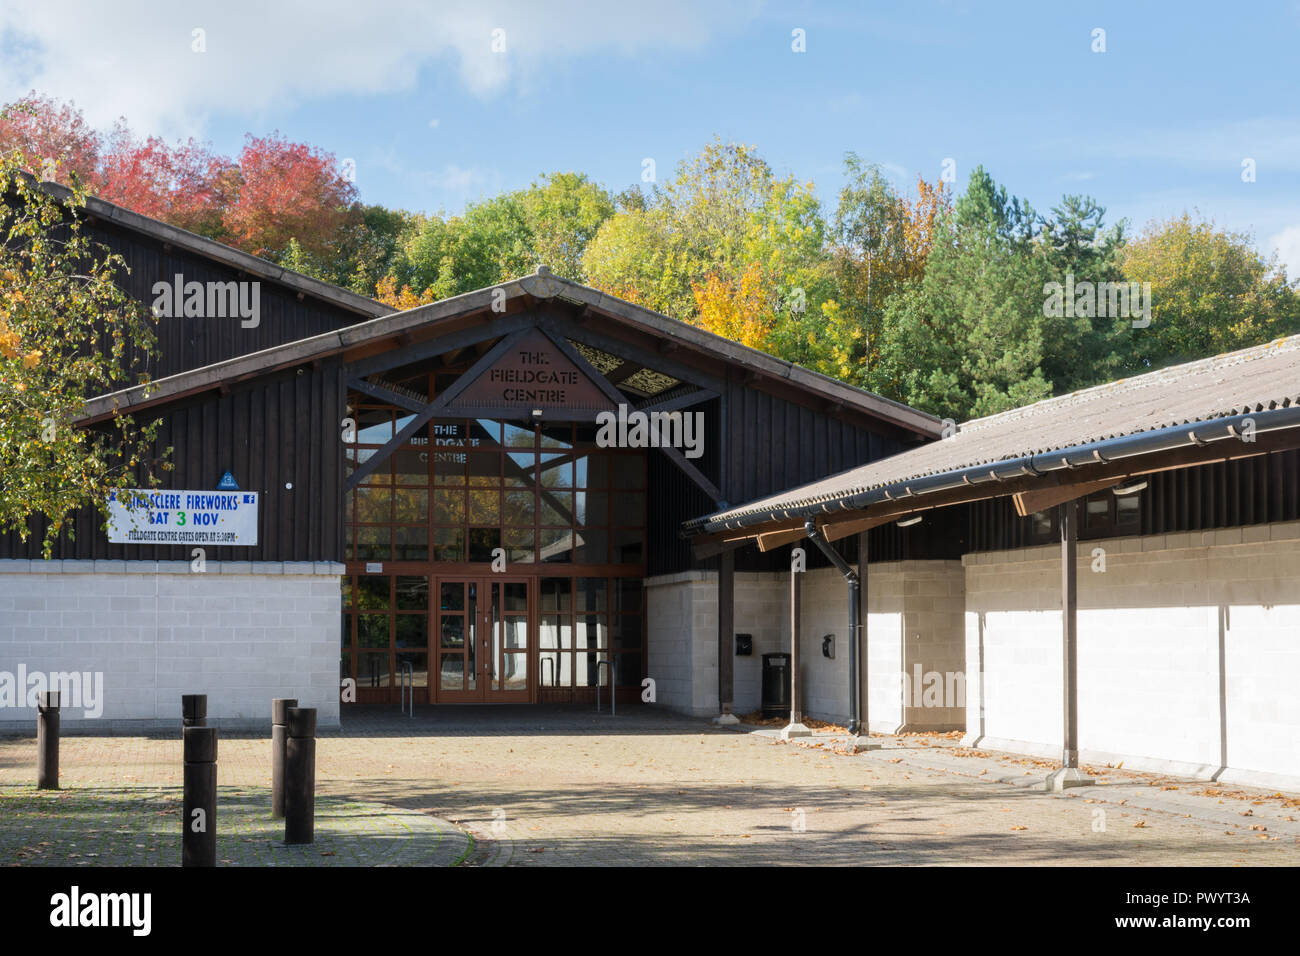 The Fieldgate Centre, a community centre in Kingsclere, Hampshire, UK Stock Photo